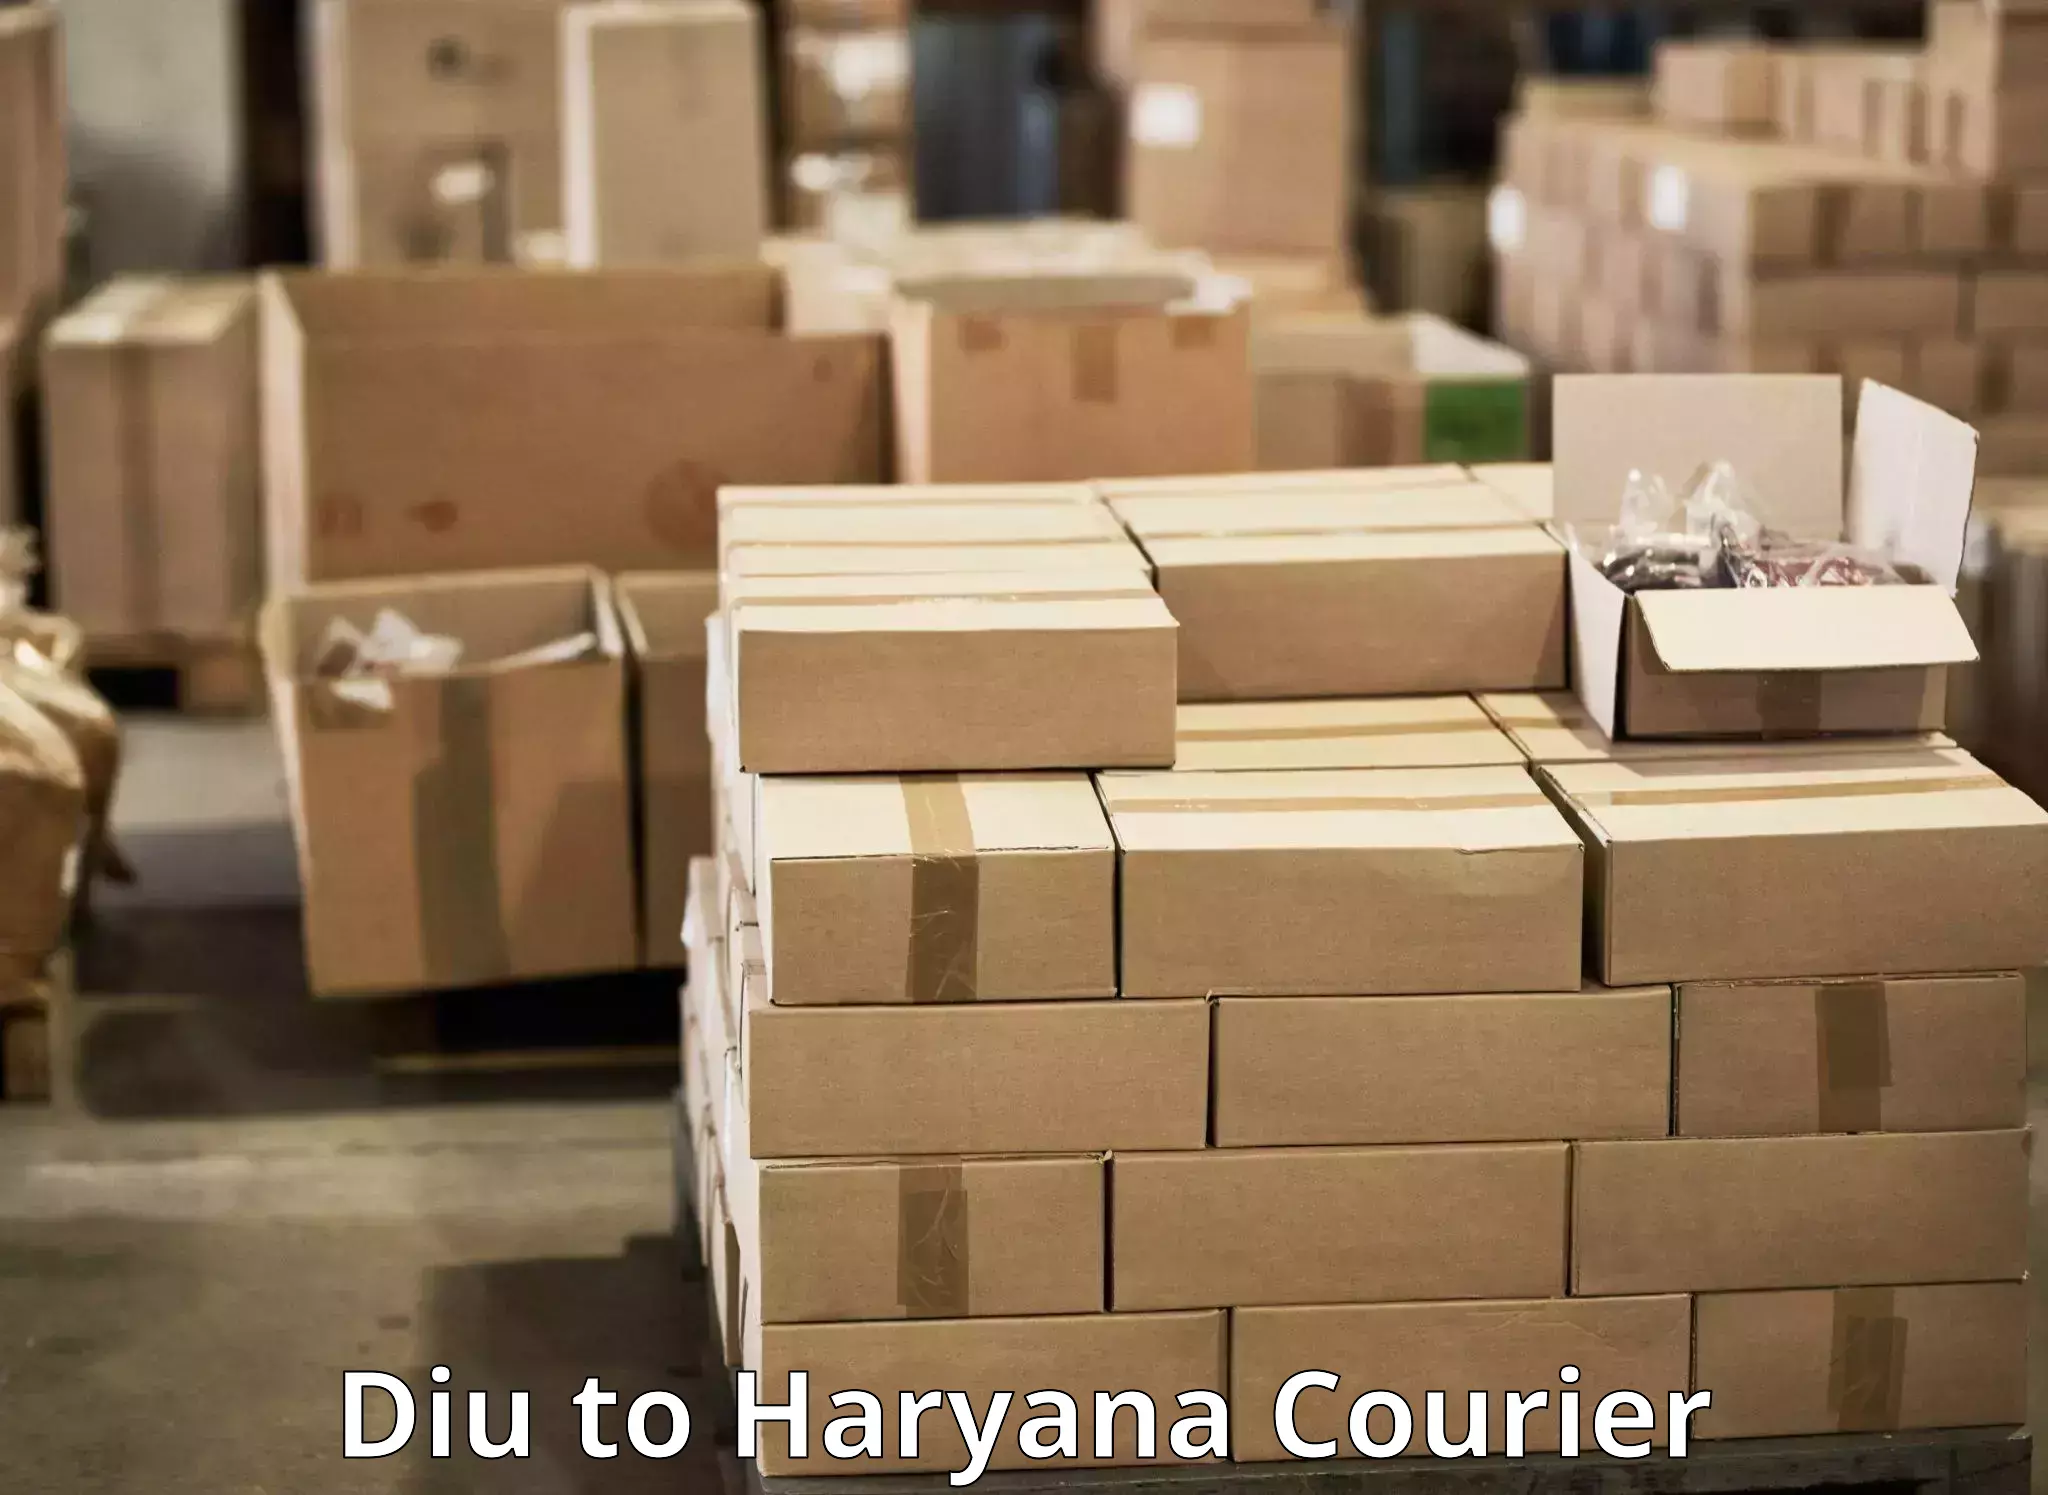 Nationwide delivery network Diu to Haryana